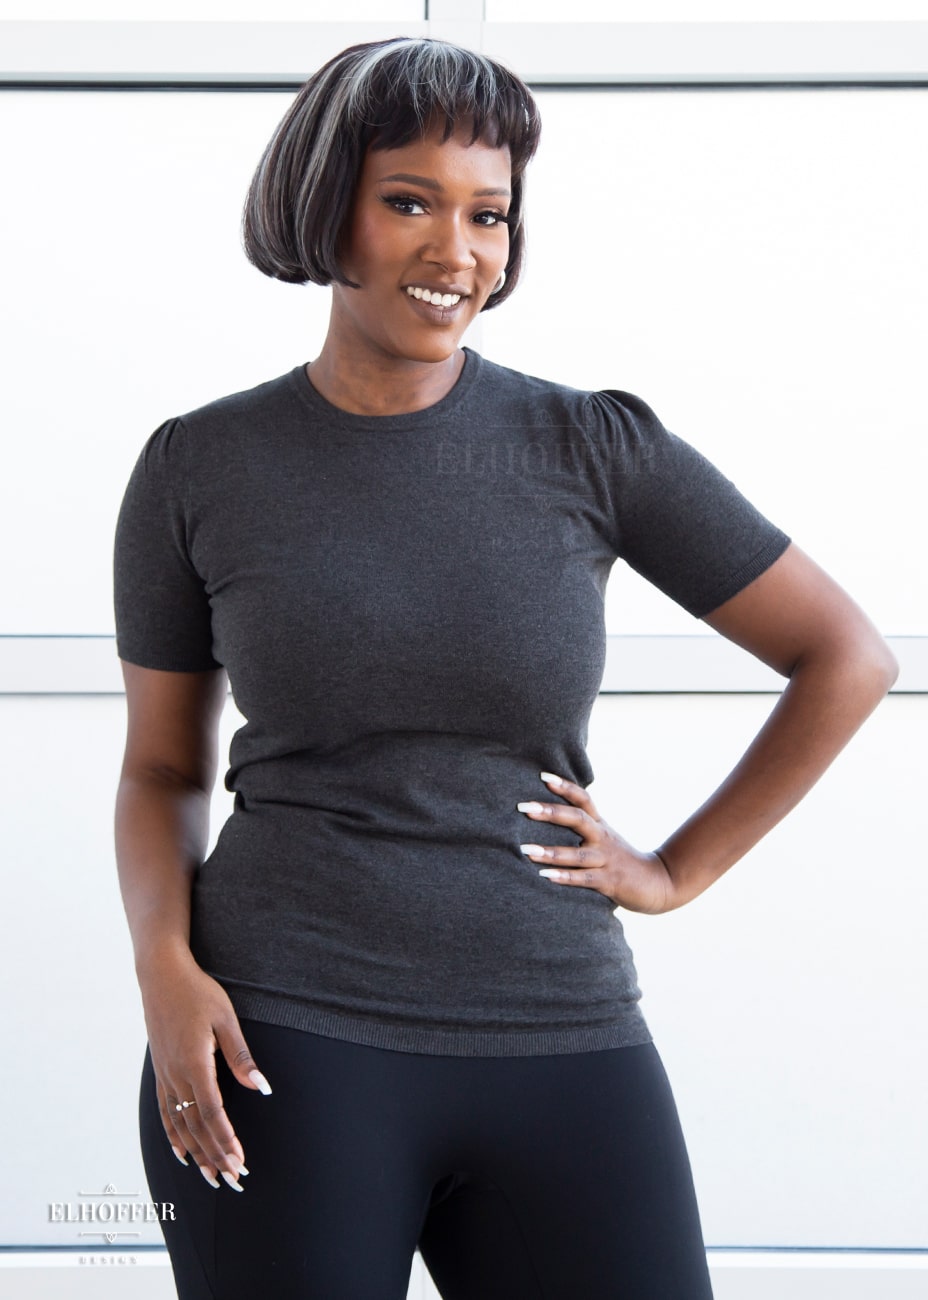 Lynsi, a medium dark skinned model with short black and white hair, is smiling while wearing a short sleeve light weight charcoal grey knit top. The top hits about mid hip in length and the sleeves have pleated gathering at the shoulders.